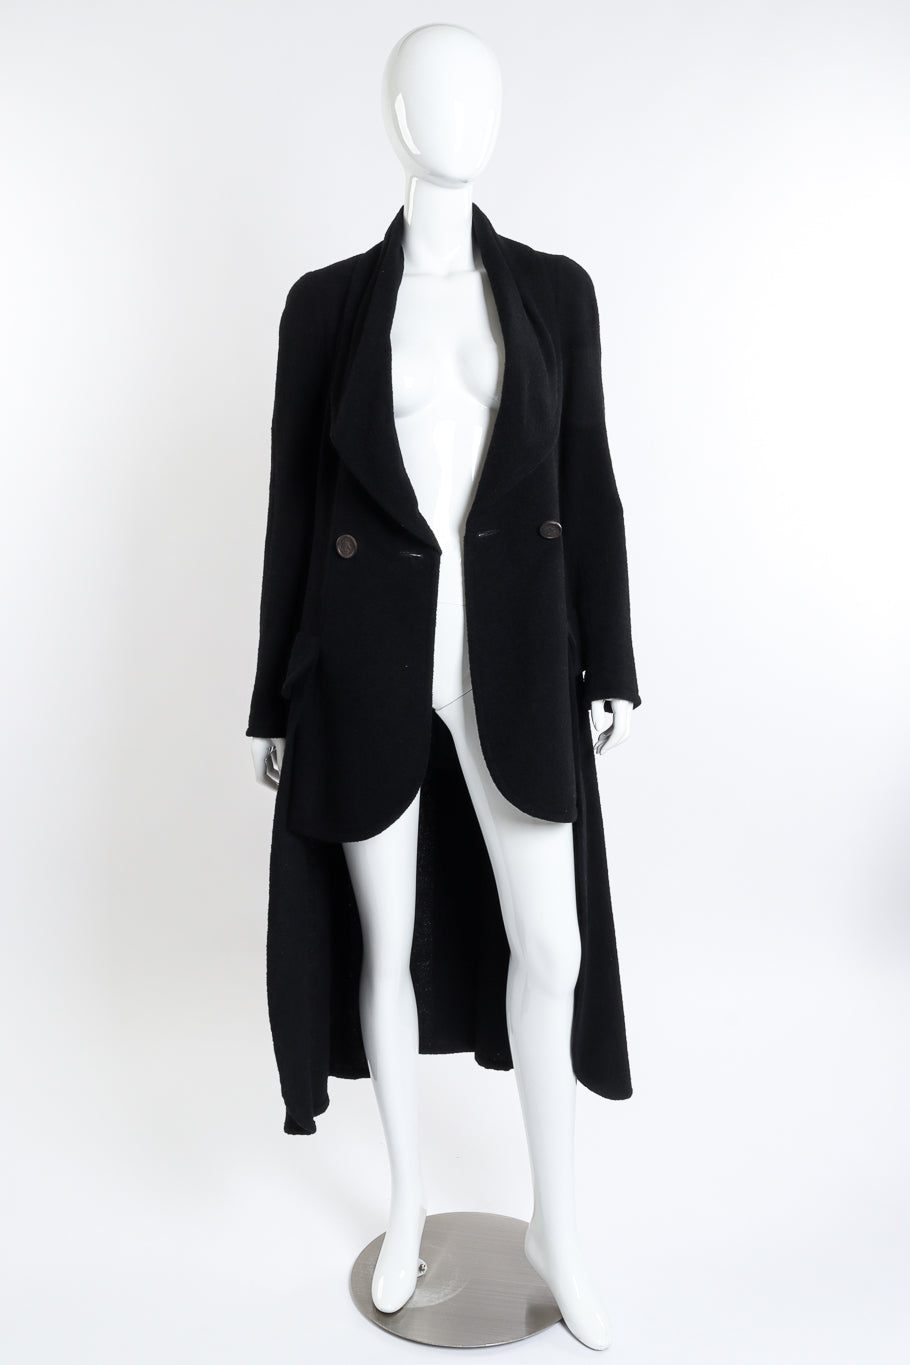 Tiered Bouclé Wool Coat by Karl Lagerfeld on mannequin unbuttoned front @recessla